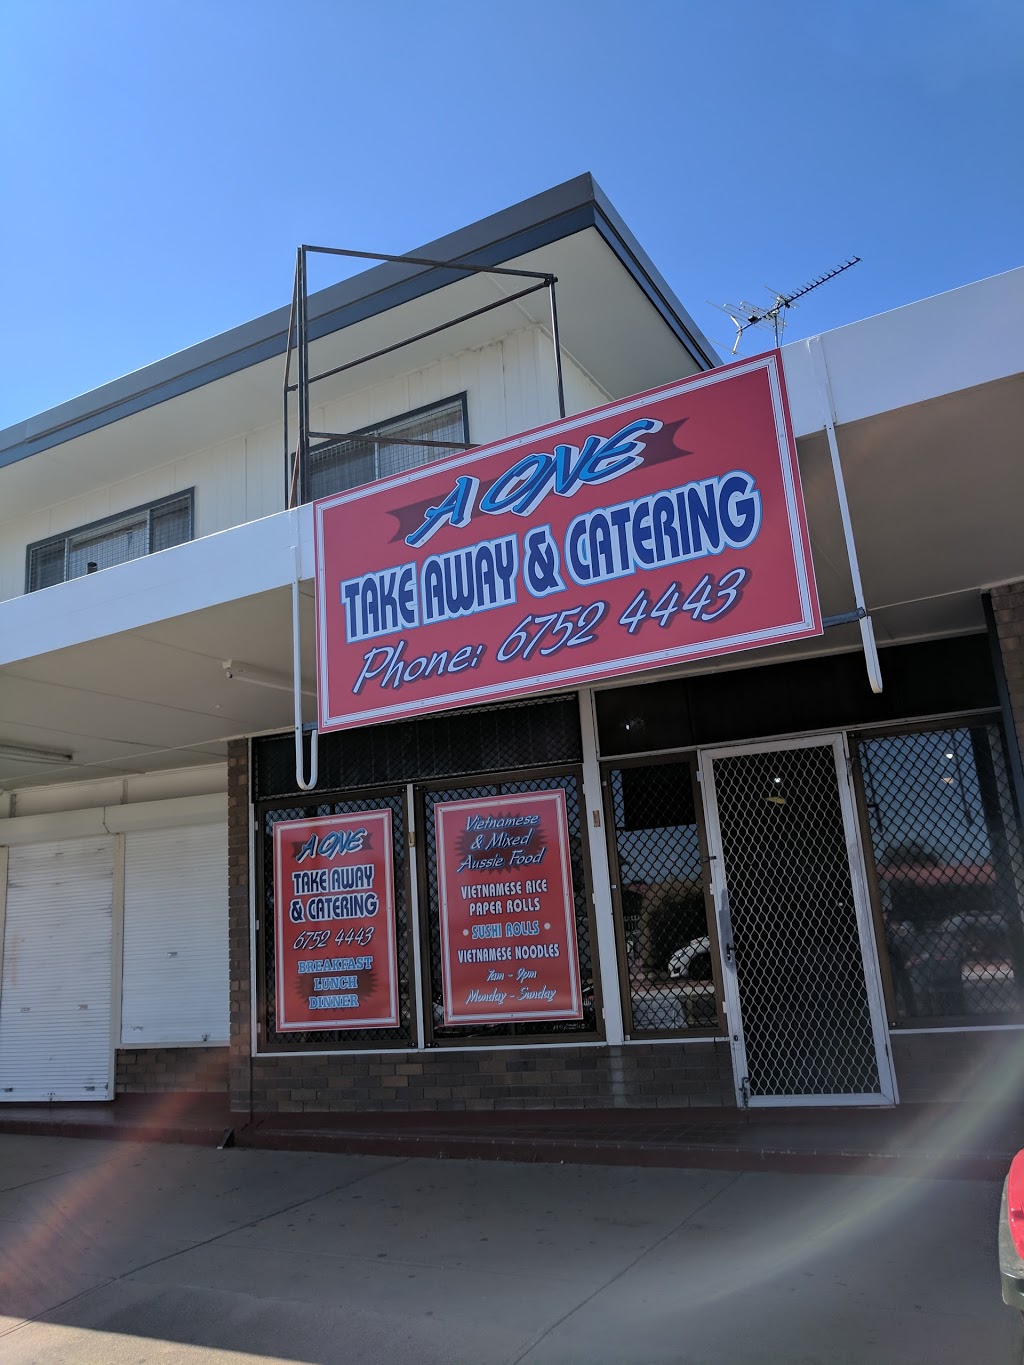 A One Takeaway & Catering (Vietnamese Foods) | restaurant | 2/52 Anne St, Moree NSW 2400, Australia | 0267524443 OR +61 2 6752 4443